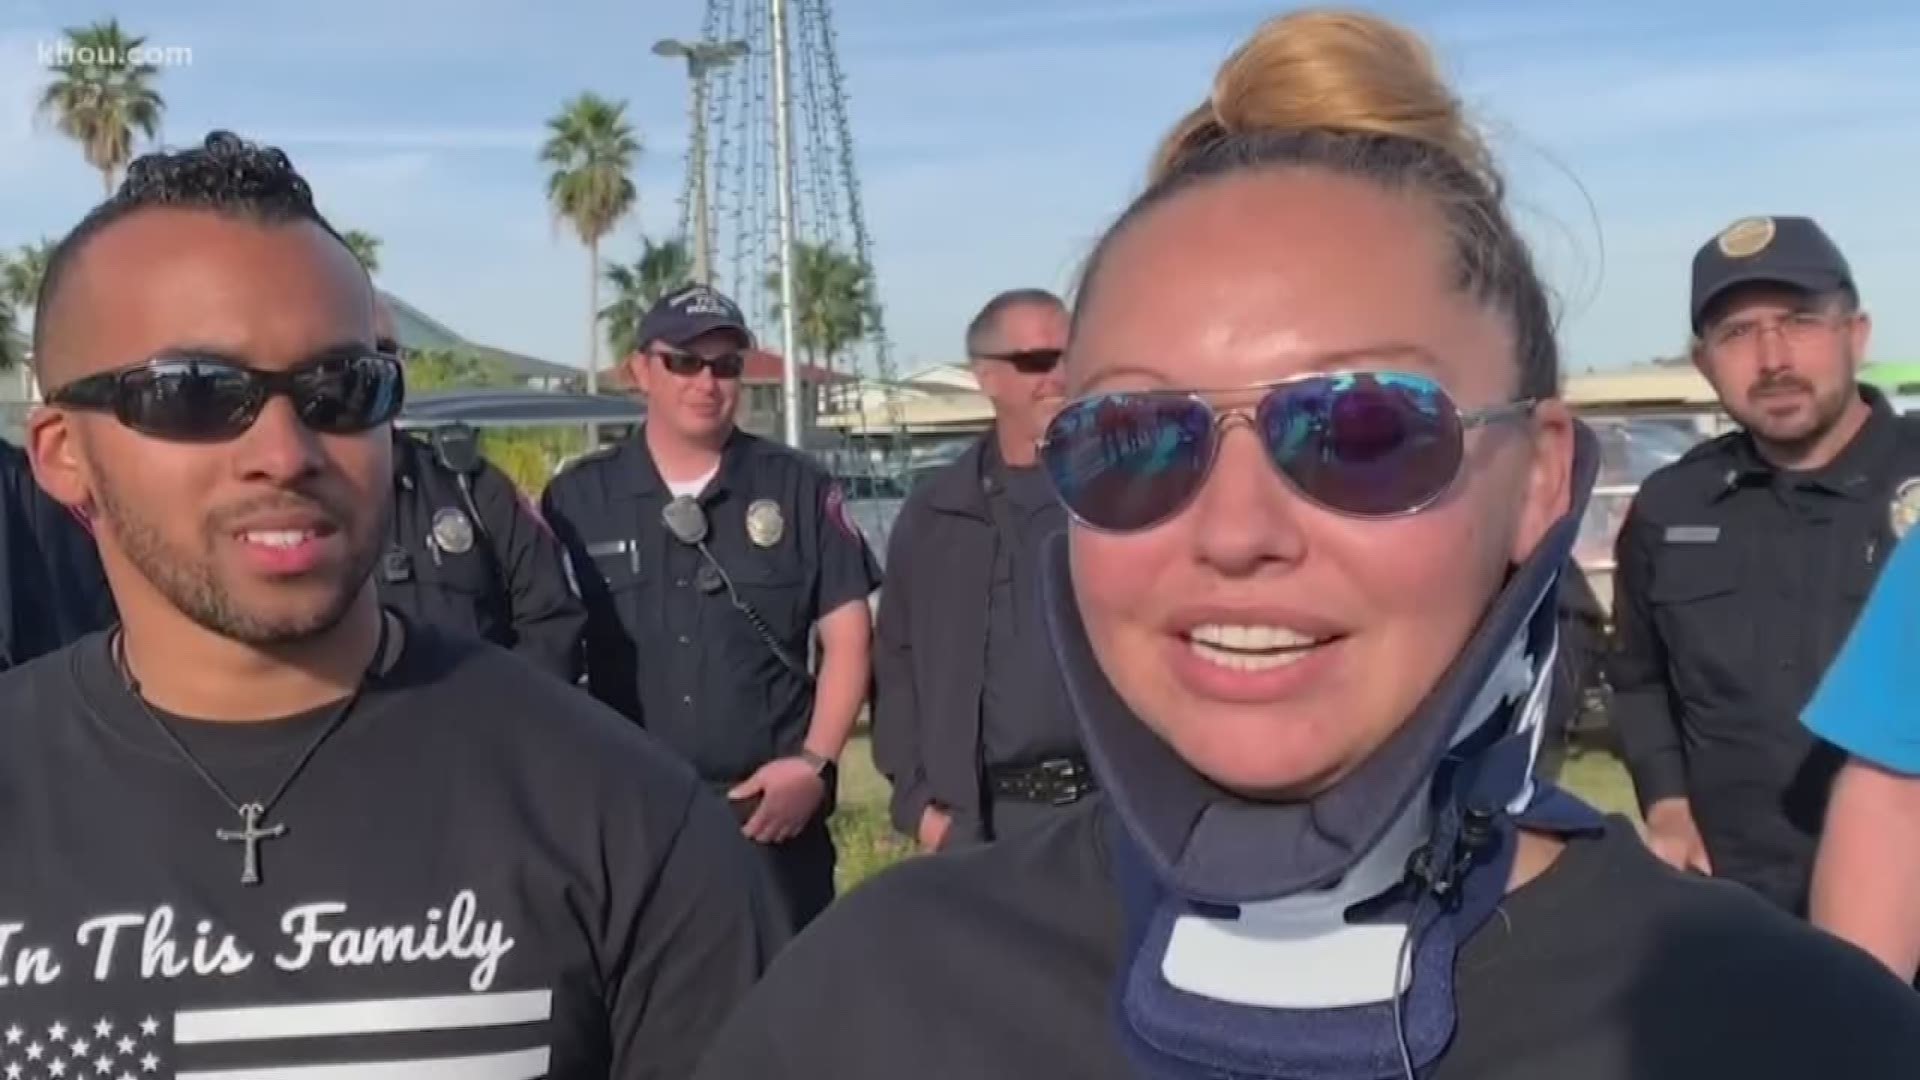 Jamaica Beach police officer Kristen Ornelas is still getting back in the swing of things since she was pulled from a mangled police cruiser.